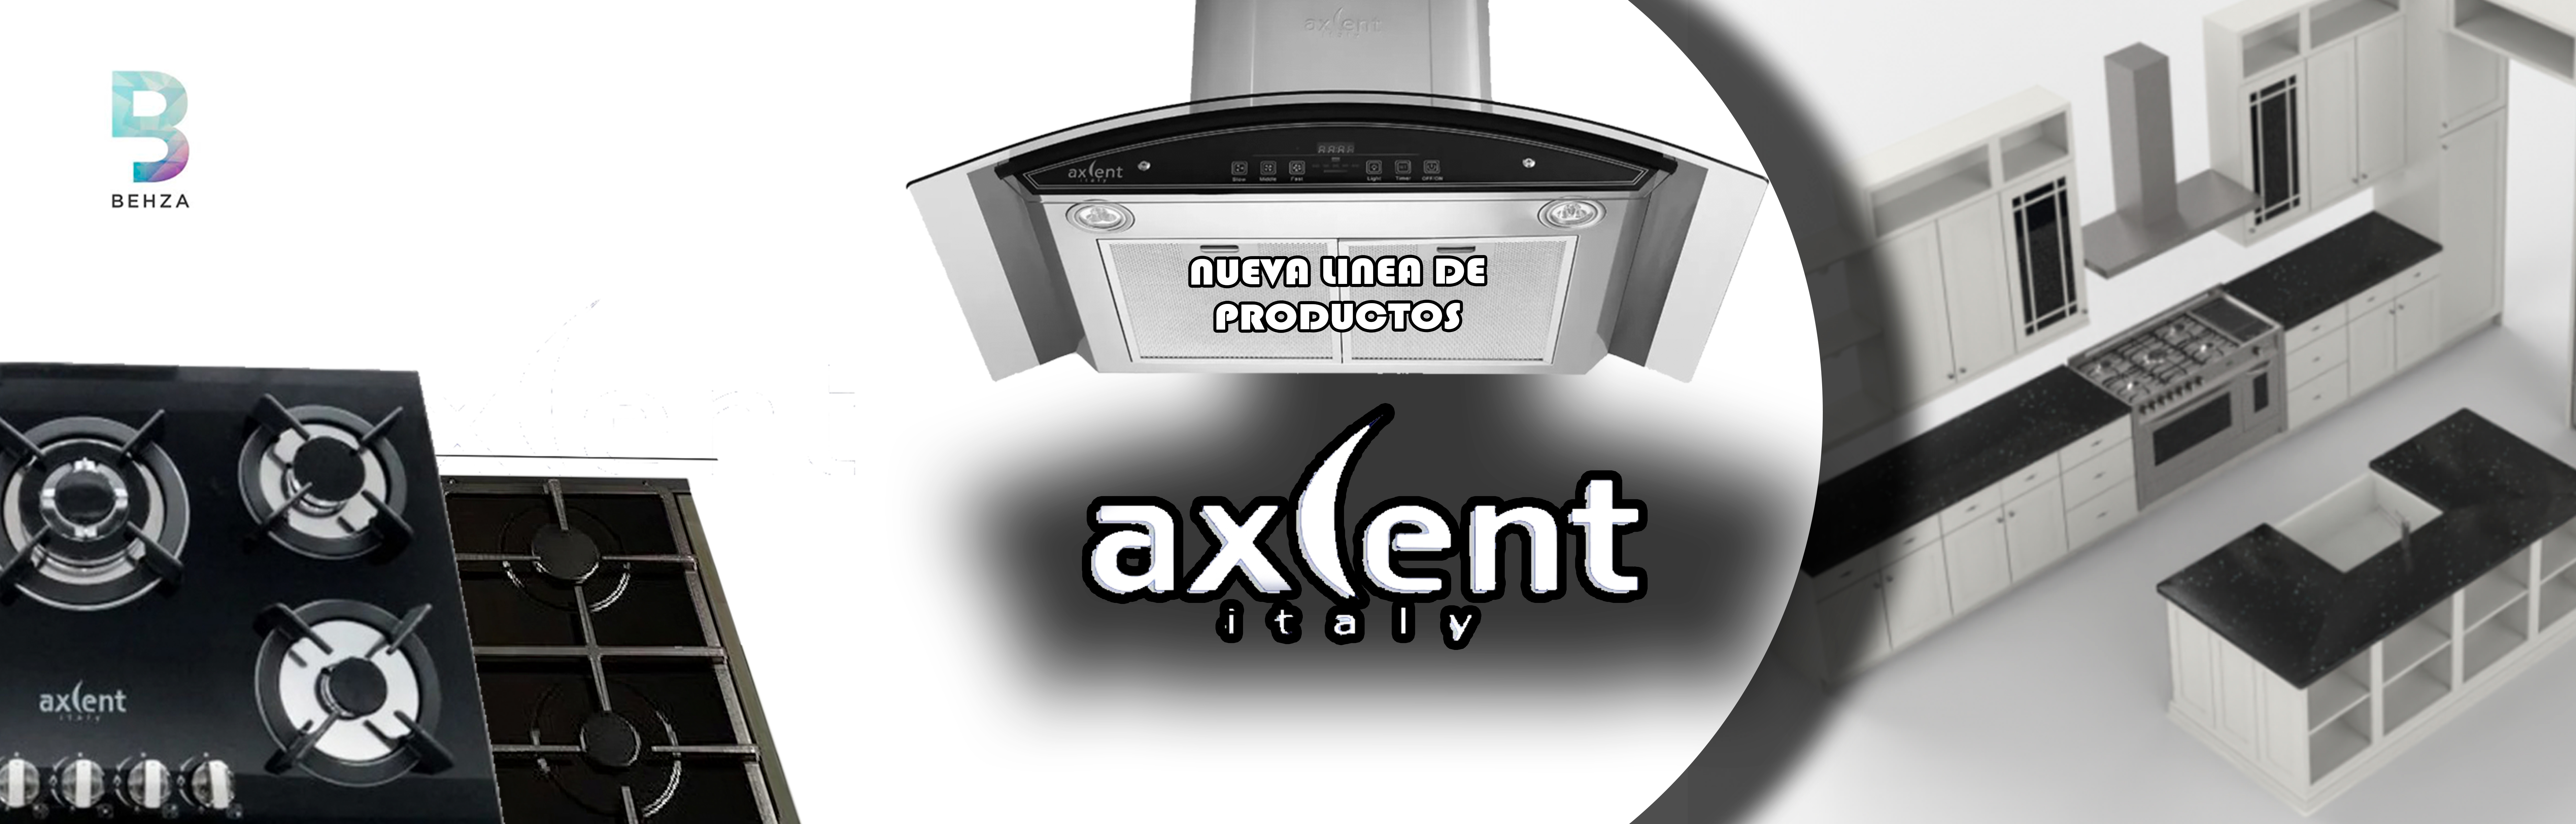 AXCENT1